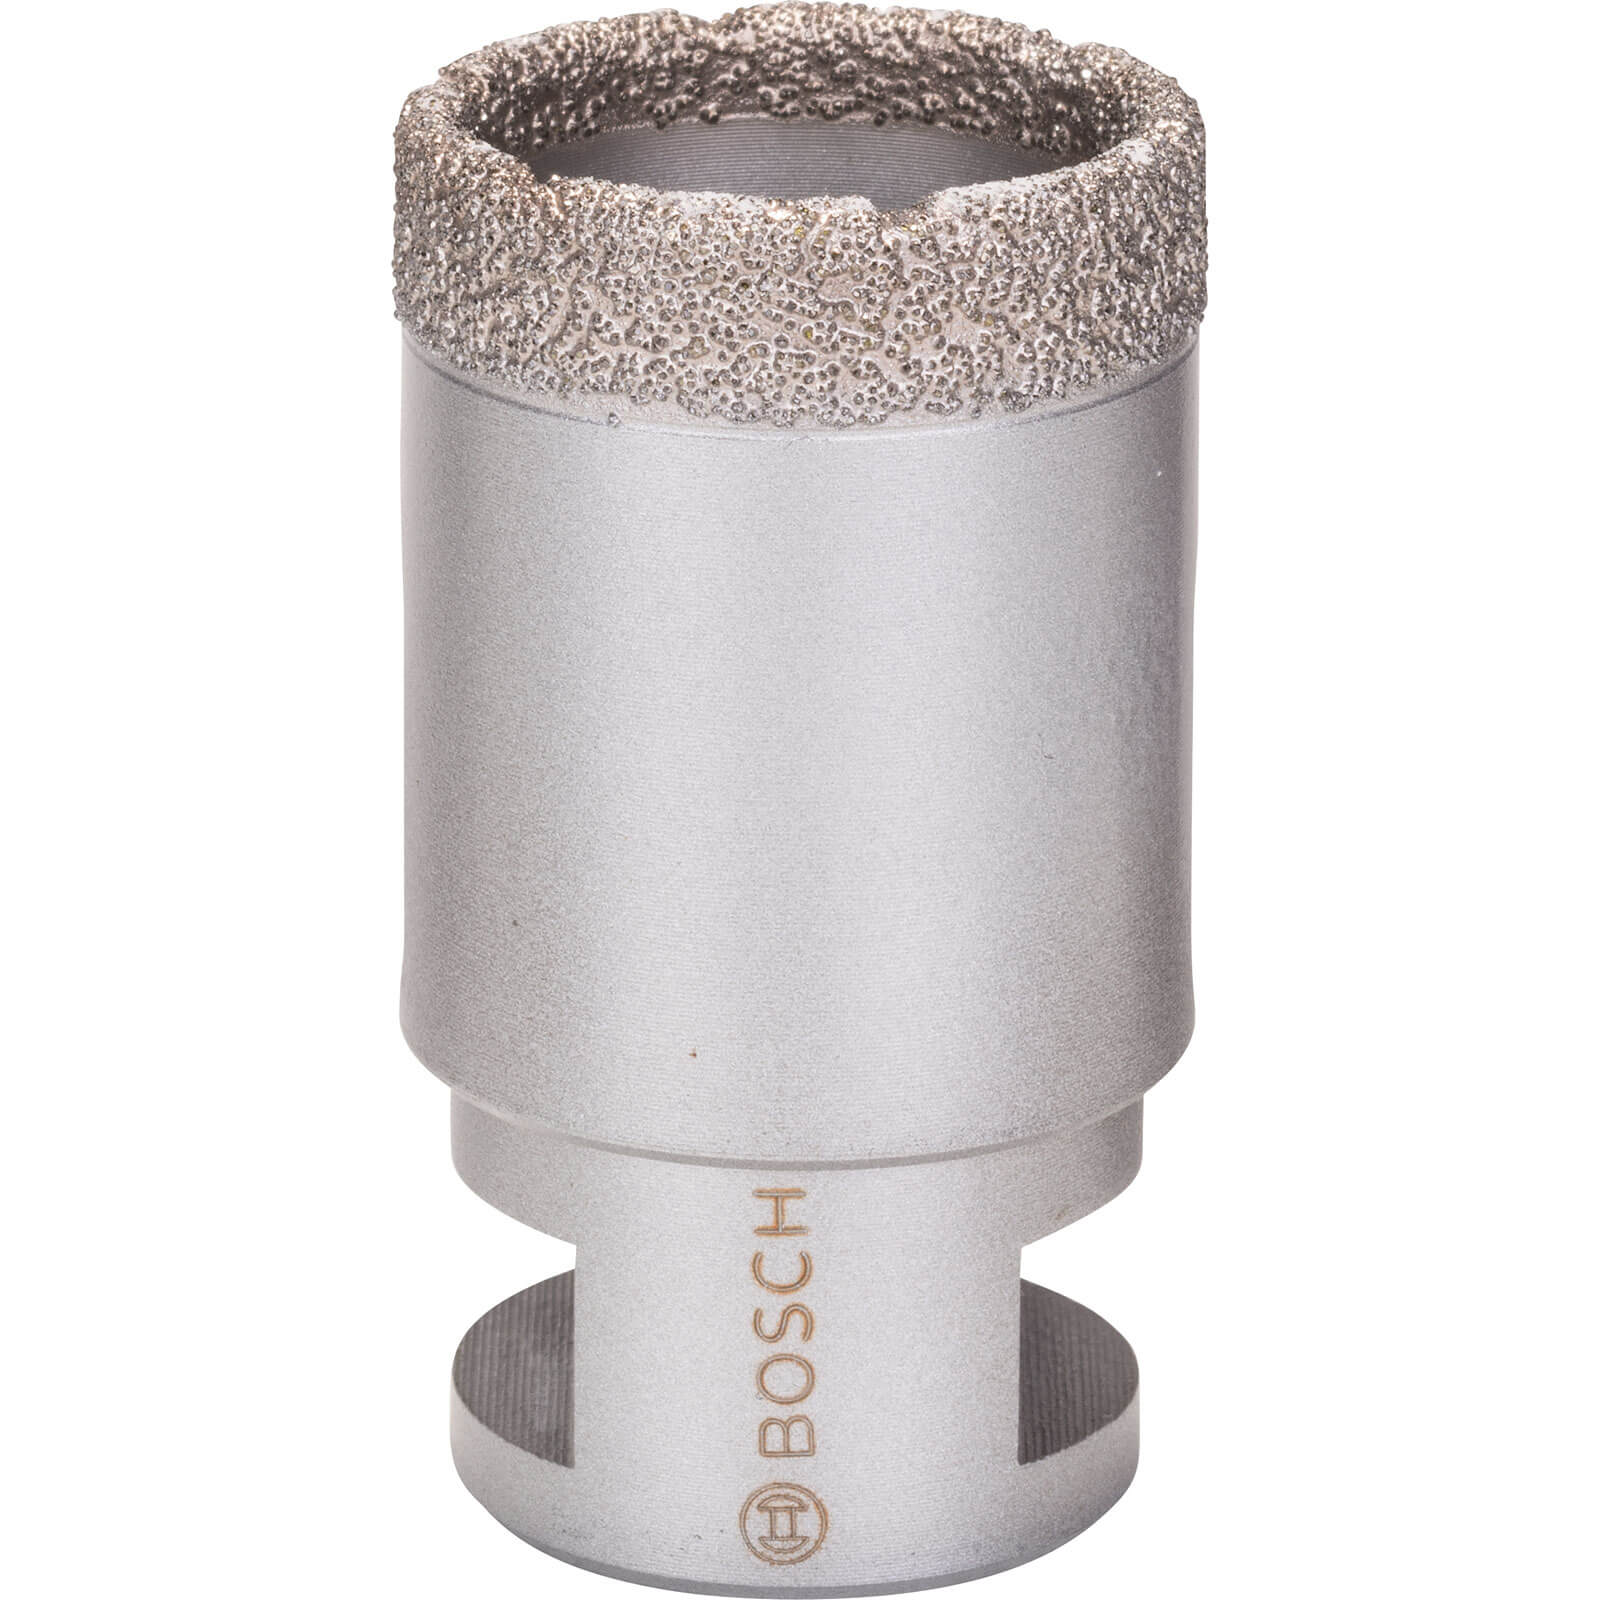 Image of Bosch Angle Grinder Dry Diamond Hole Cutter For Ceramics 35mm